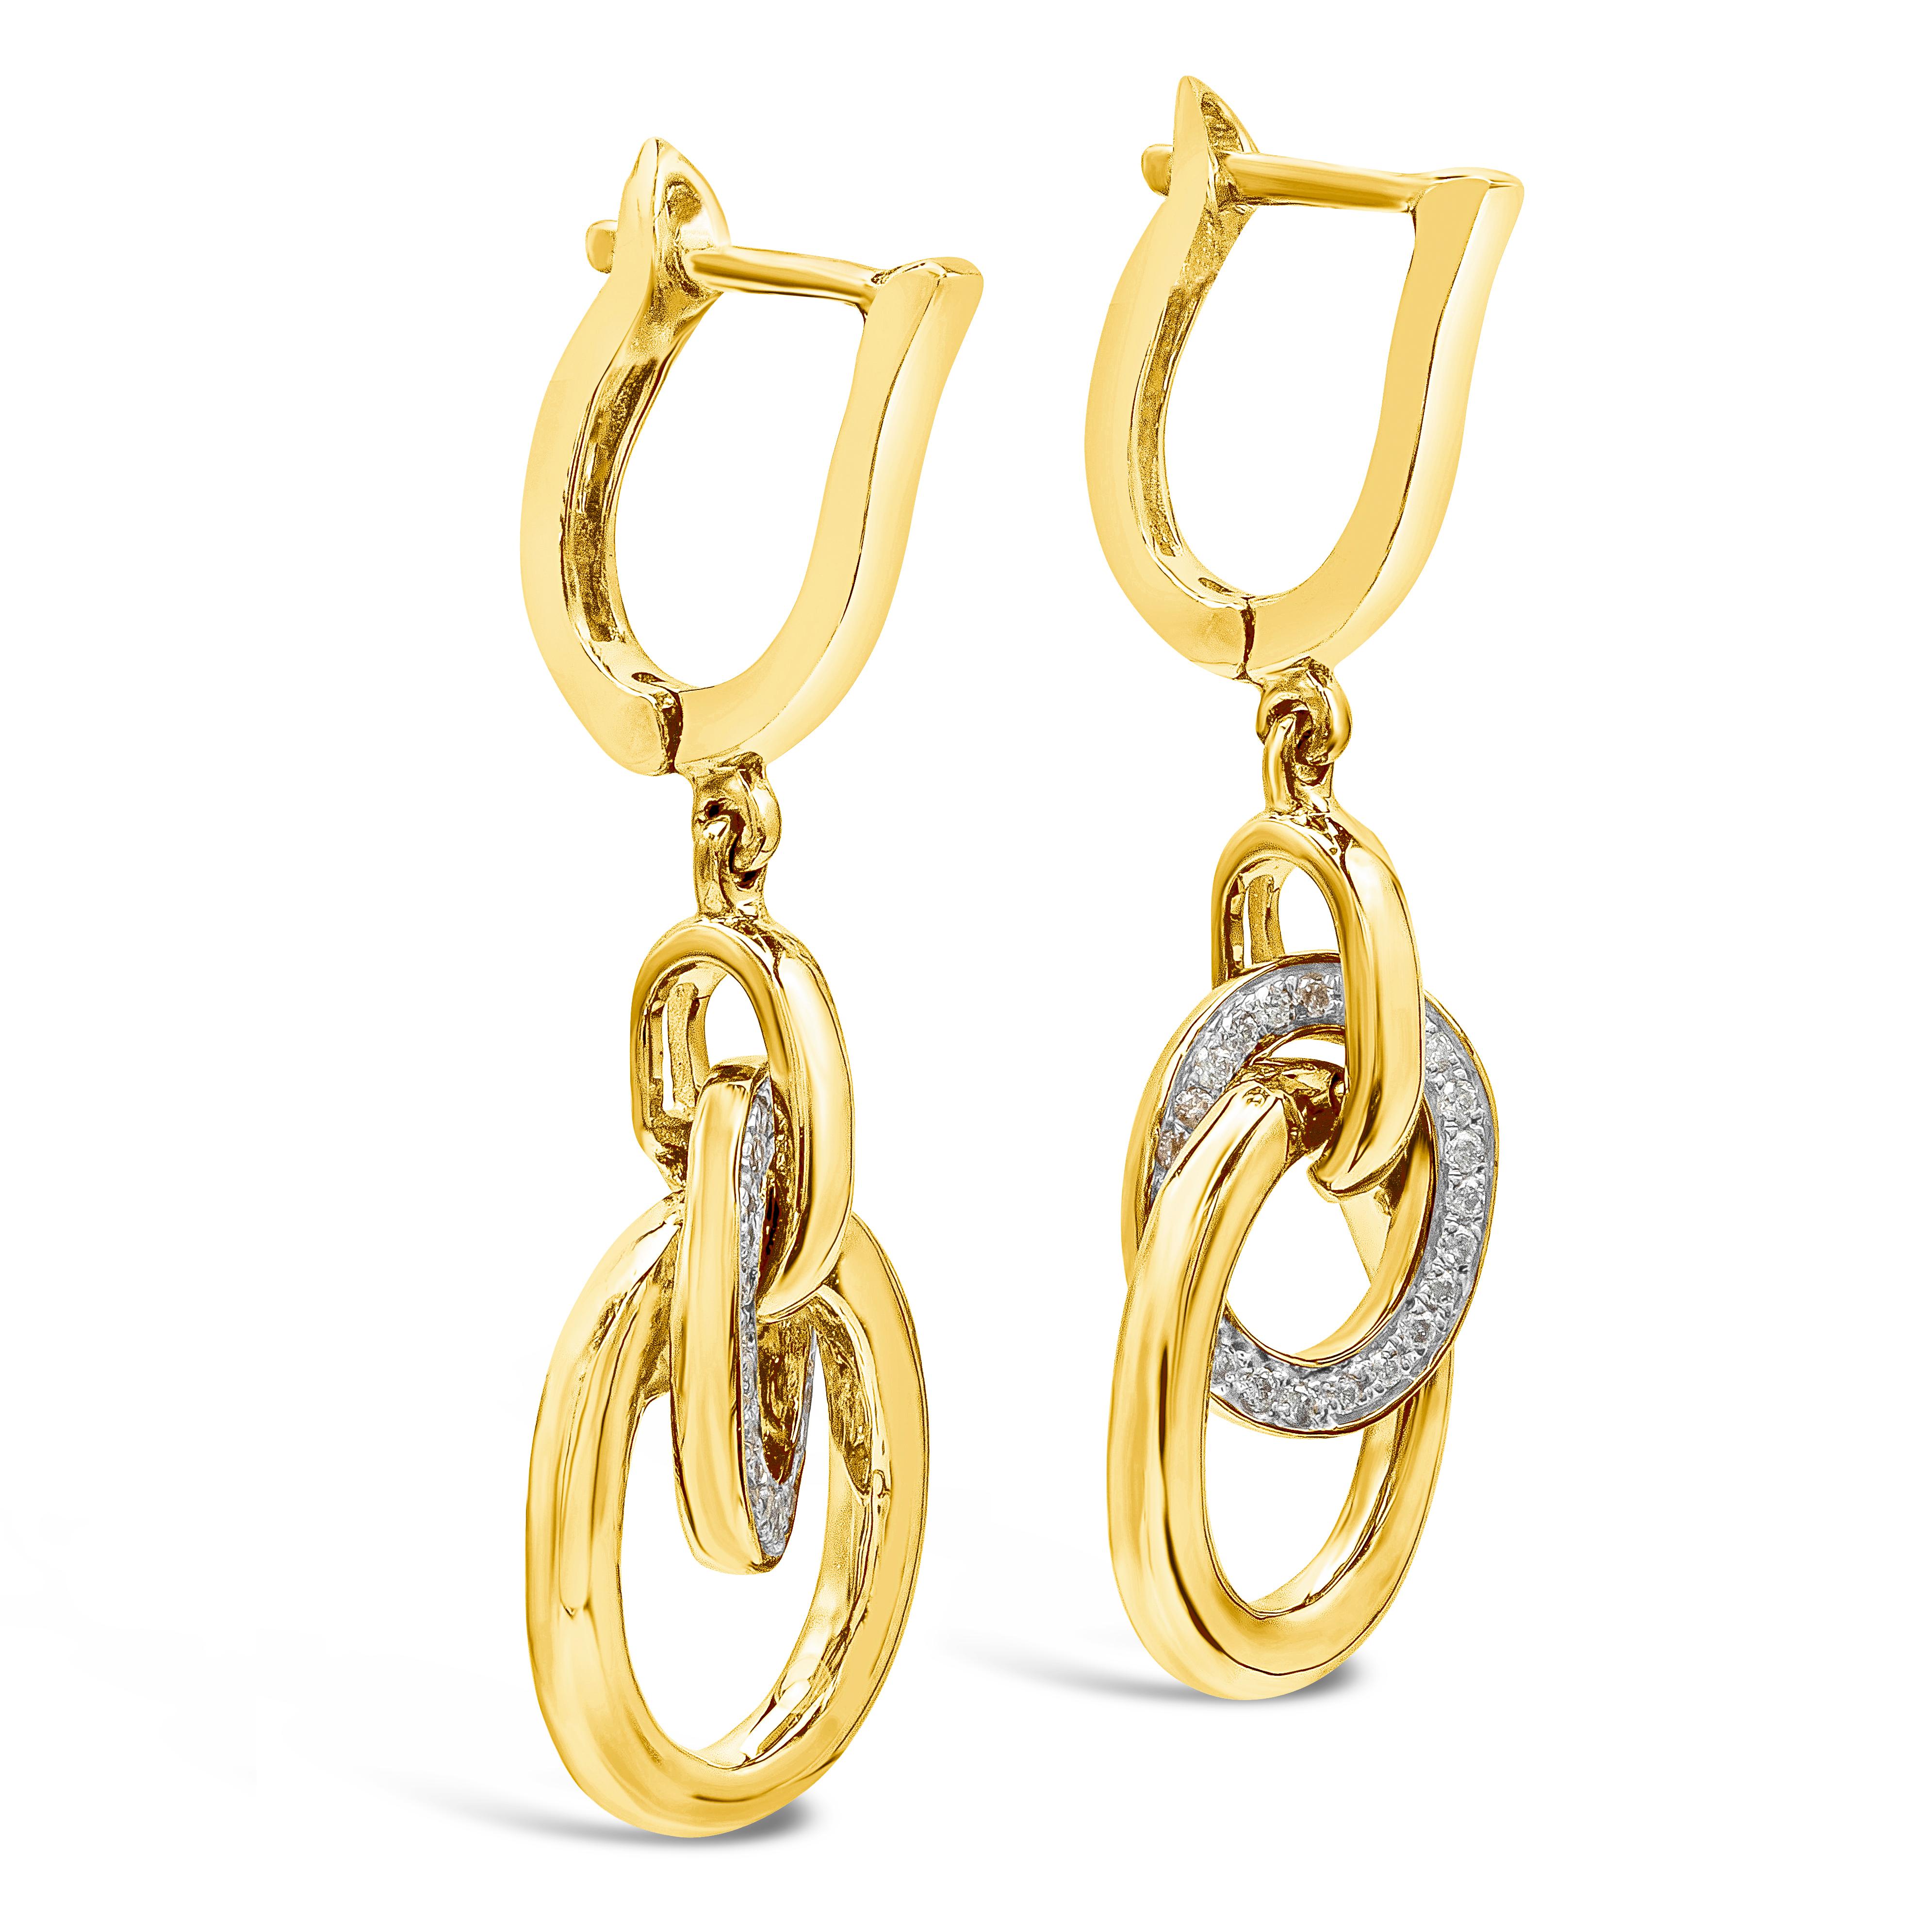 A versatile pair of dangle earrings showcasing connected open-work rings, one of which is accented with round diamonds, made in 14k yellow gold. Attached to a small hoop. Diamonds weigh 0.15 carats total.